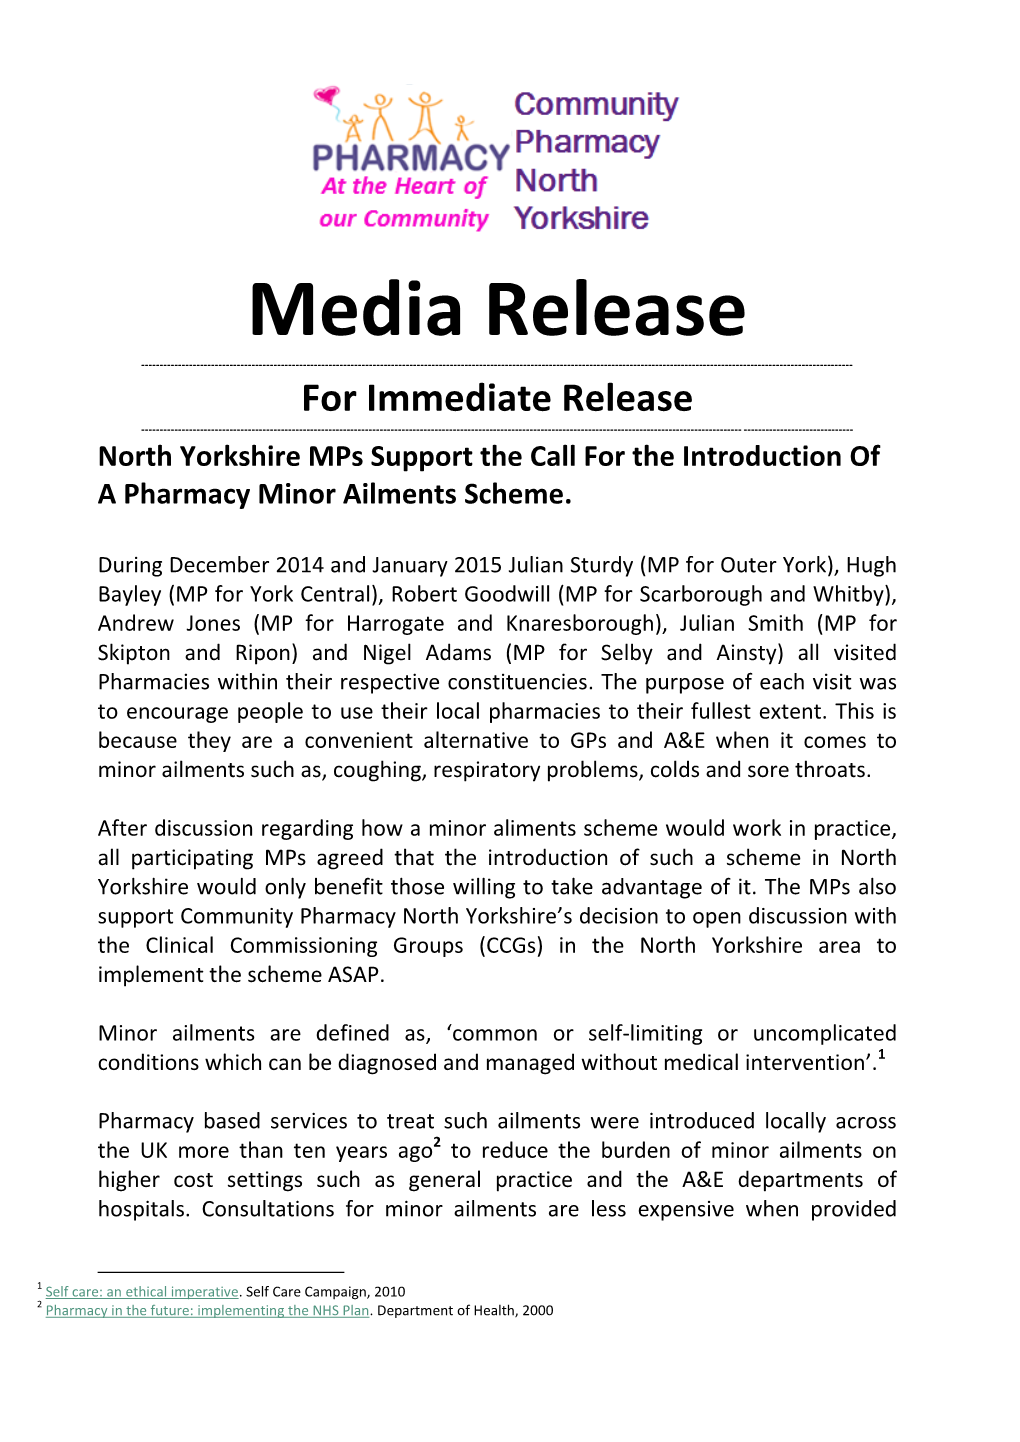 Media Release ------For Immediate Release ------North Yorkshire Mps Support the Call for the Introduction of a Pharmacy Minor Ailments Scheme